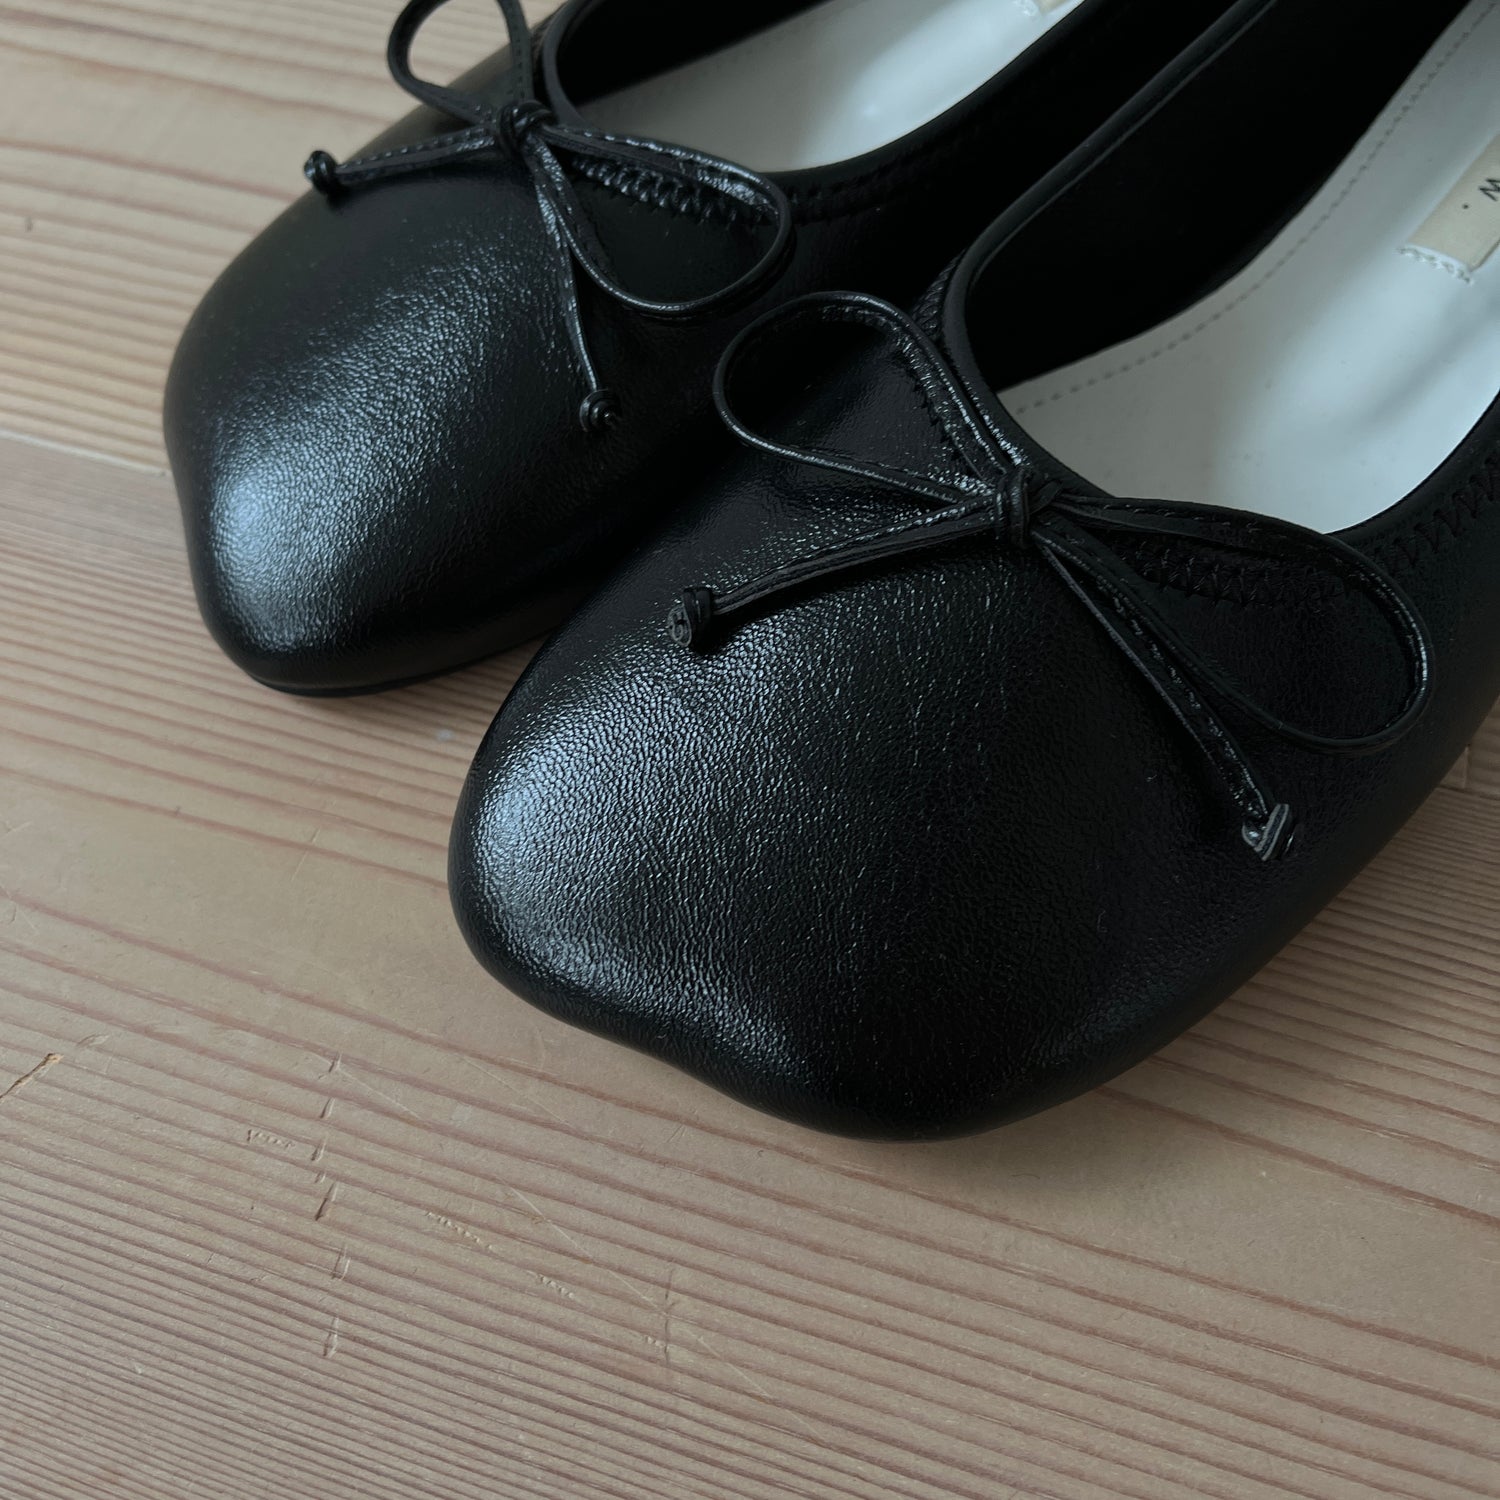 round square ballet shoes